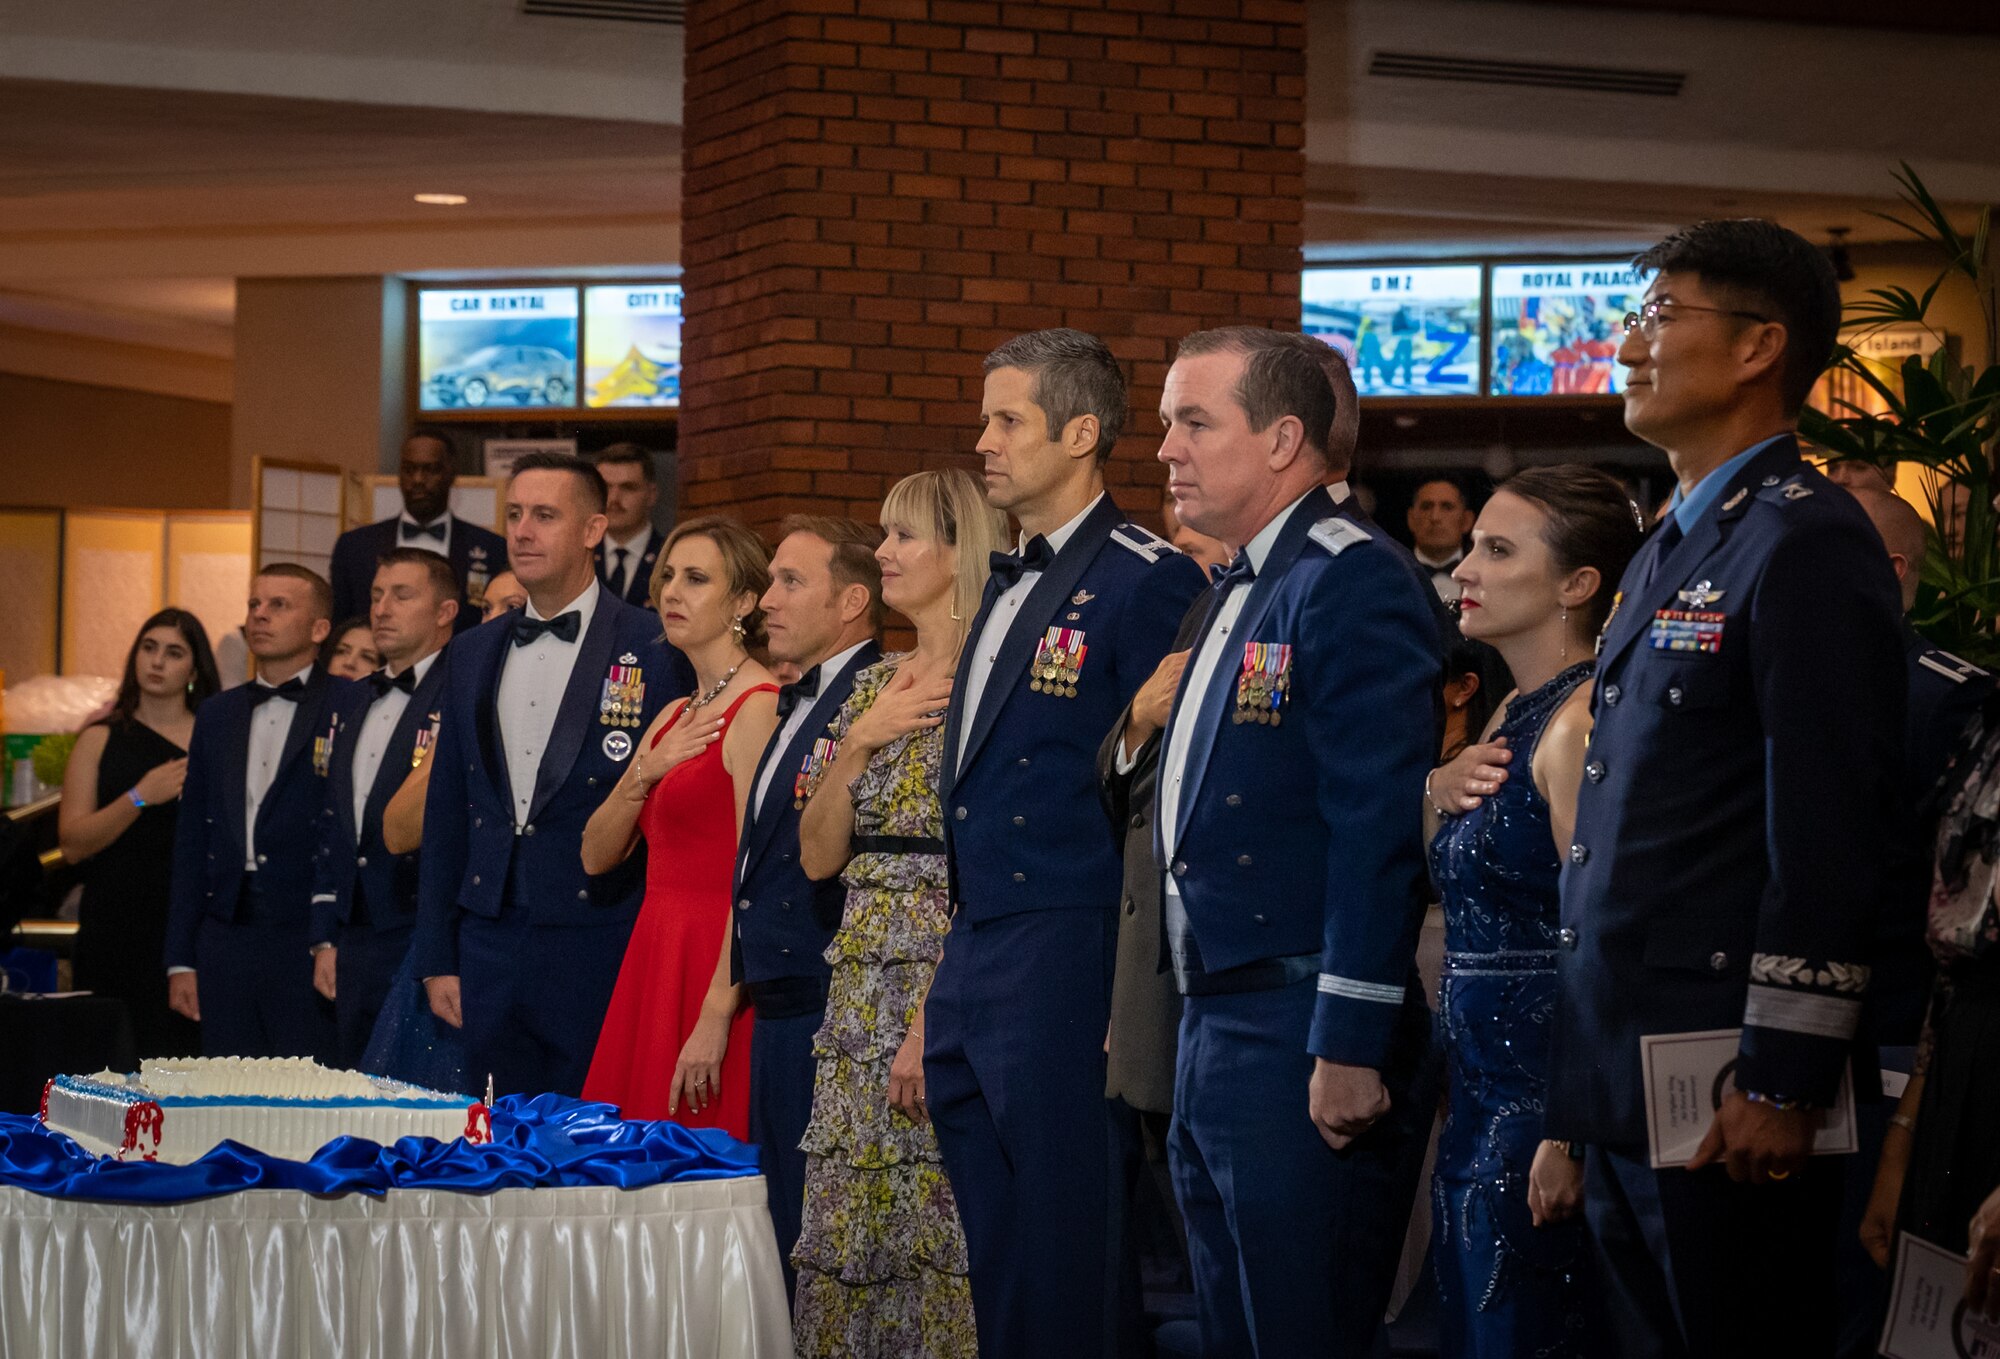 Distinguished guests stand during the singing of the national anthems during the 76th Air Force Ball at U.S. Army Garrison Yongsan, Republic of Korea, Sept. 23, 2023. The peninsula-wide gathering brought together Airmen, families and ROK partners for a night of unity and recognition to commemorate 76 years of air power. 2023 marks the 70th year of the ROK-U.S. alliance and the event hosted not only U.S., but ROK service members, commemorating a historic year and honoring the partnership. (U.S. Air Force photo by Staff Sgt. Kelsea Caballero)